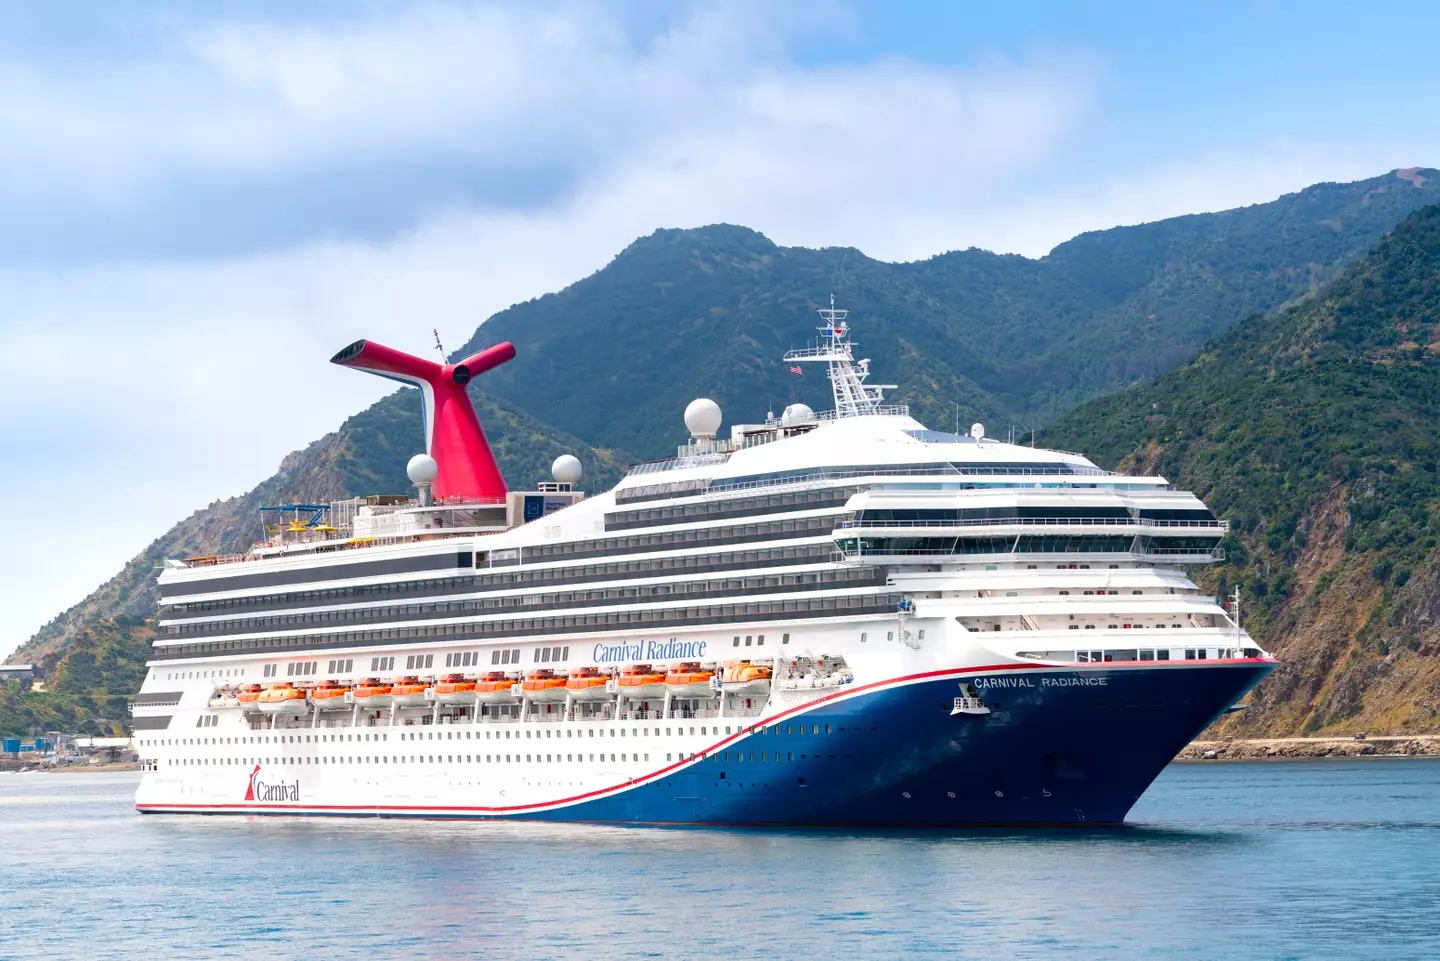 People applauded Carnival Cruises for issuing the advice. (AaronP/Bauer-Griffin/GC Images)